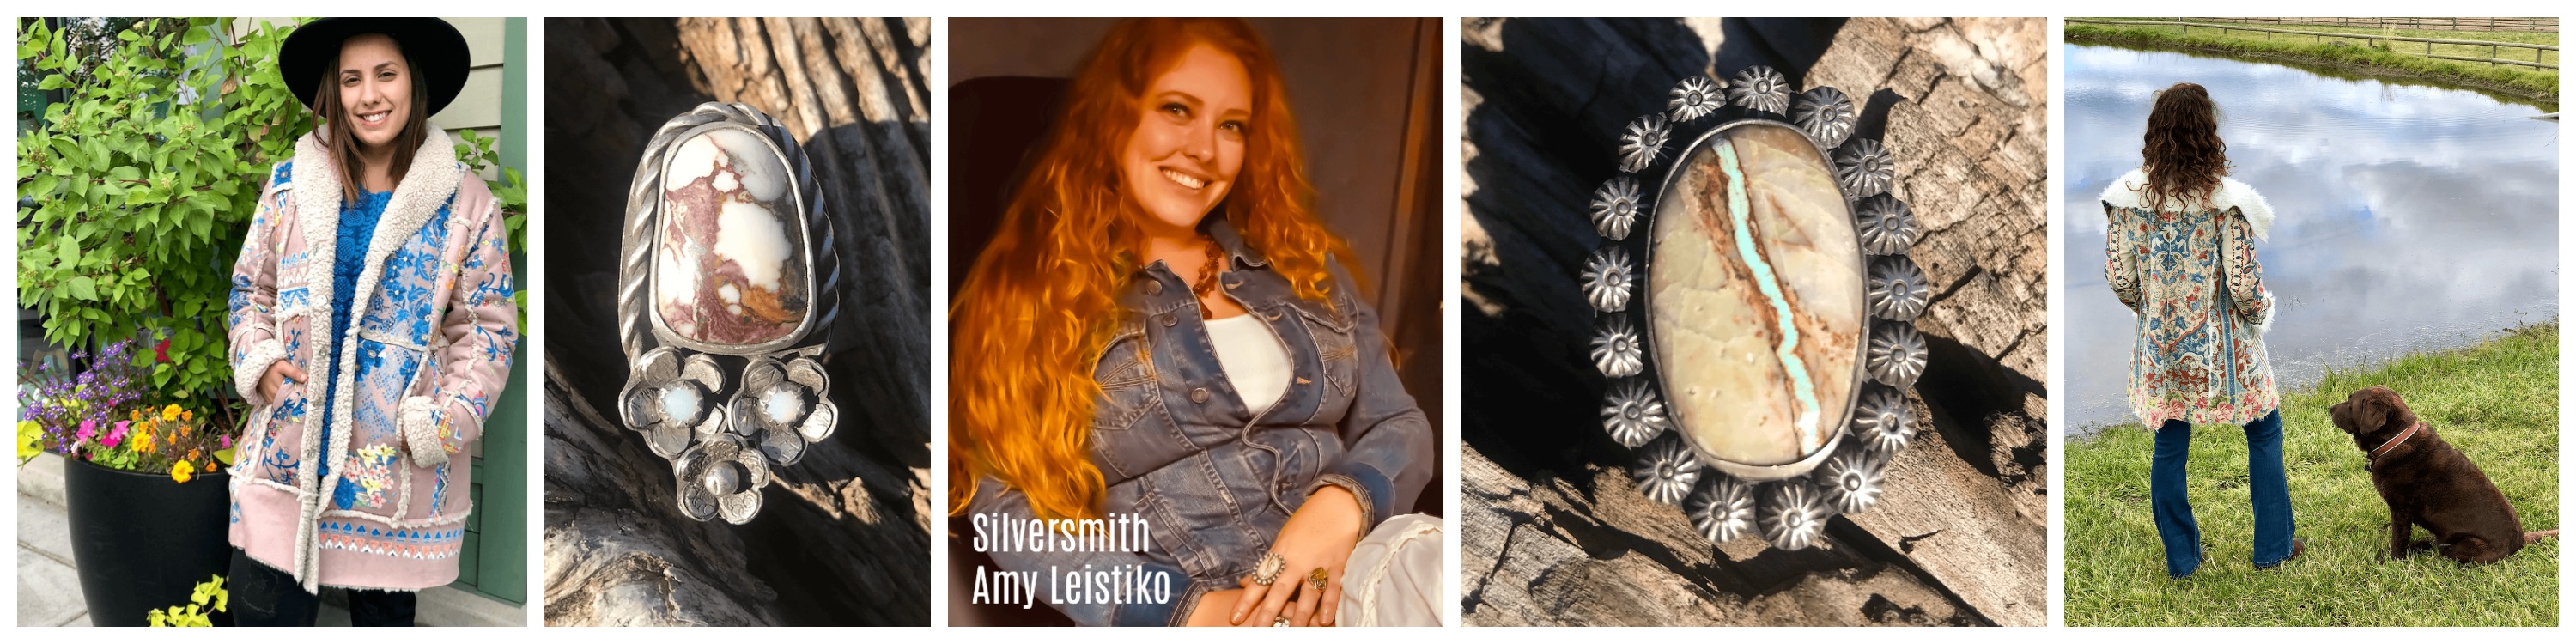 Images of Silversmith Amy Leistiko and her jewelry, plus images of Johnny Was.